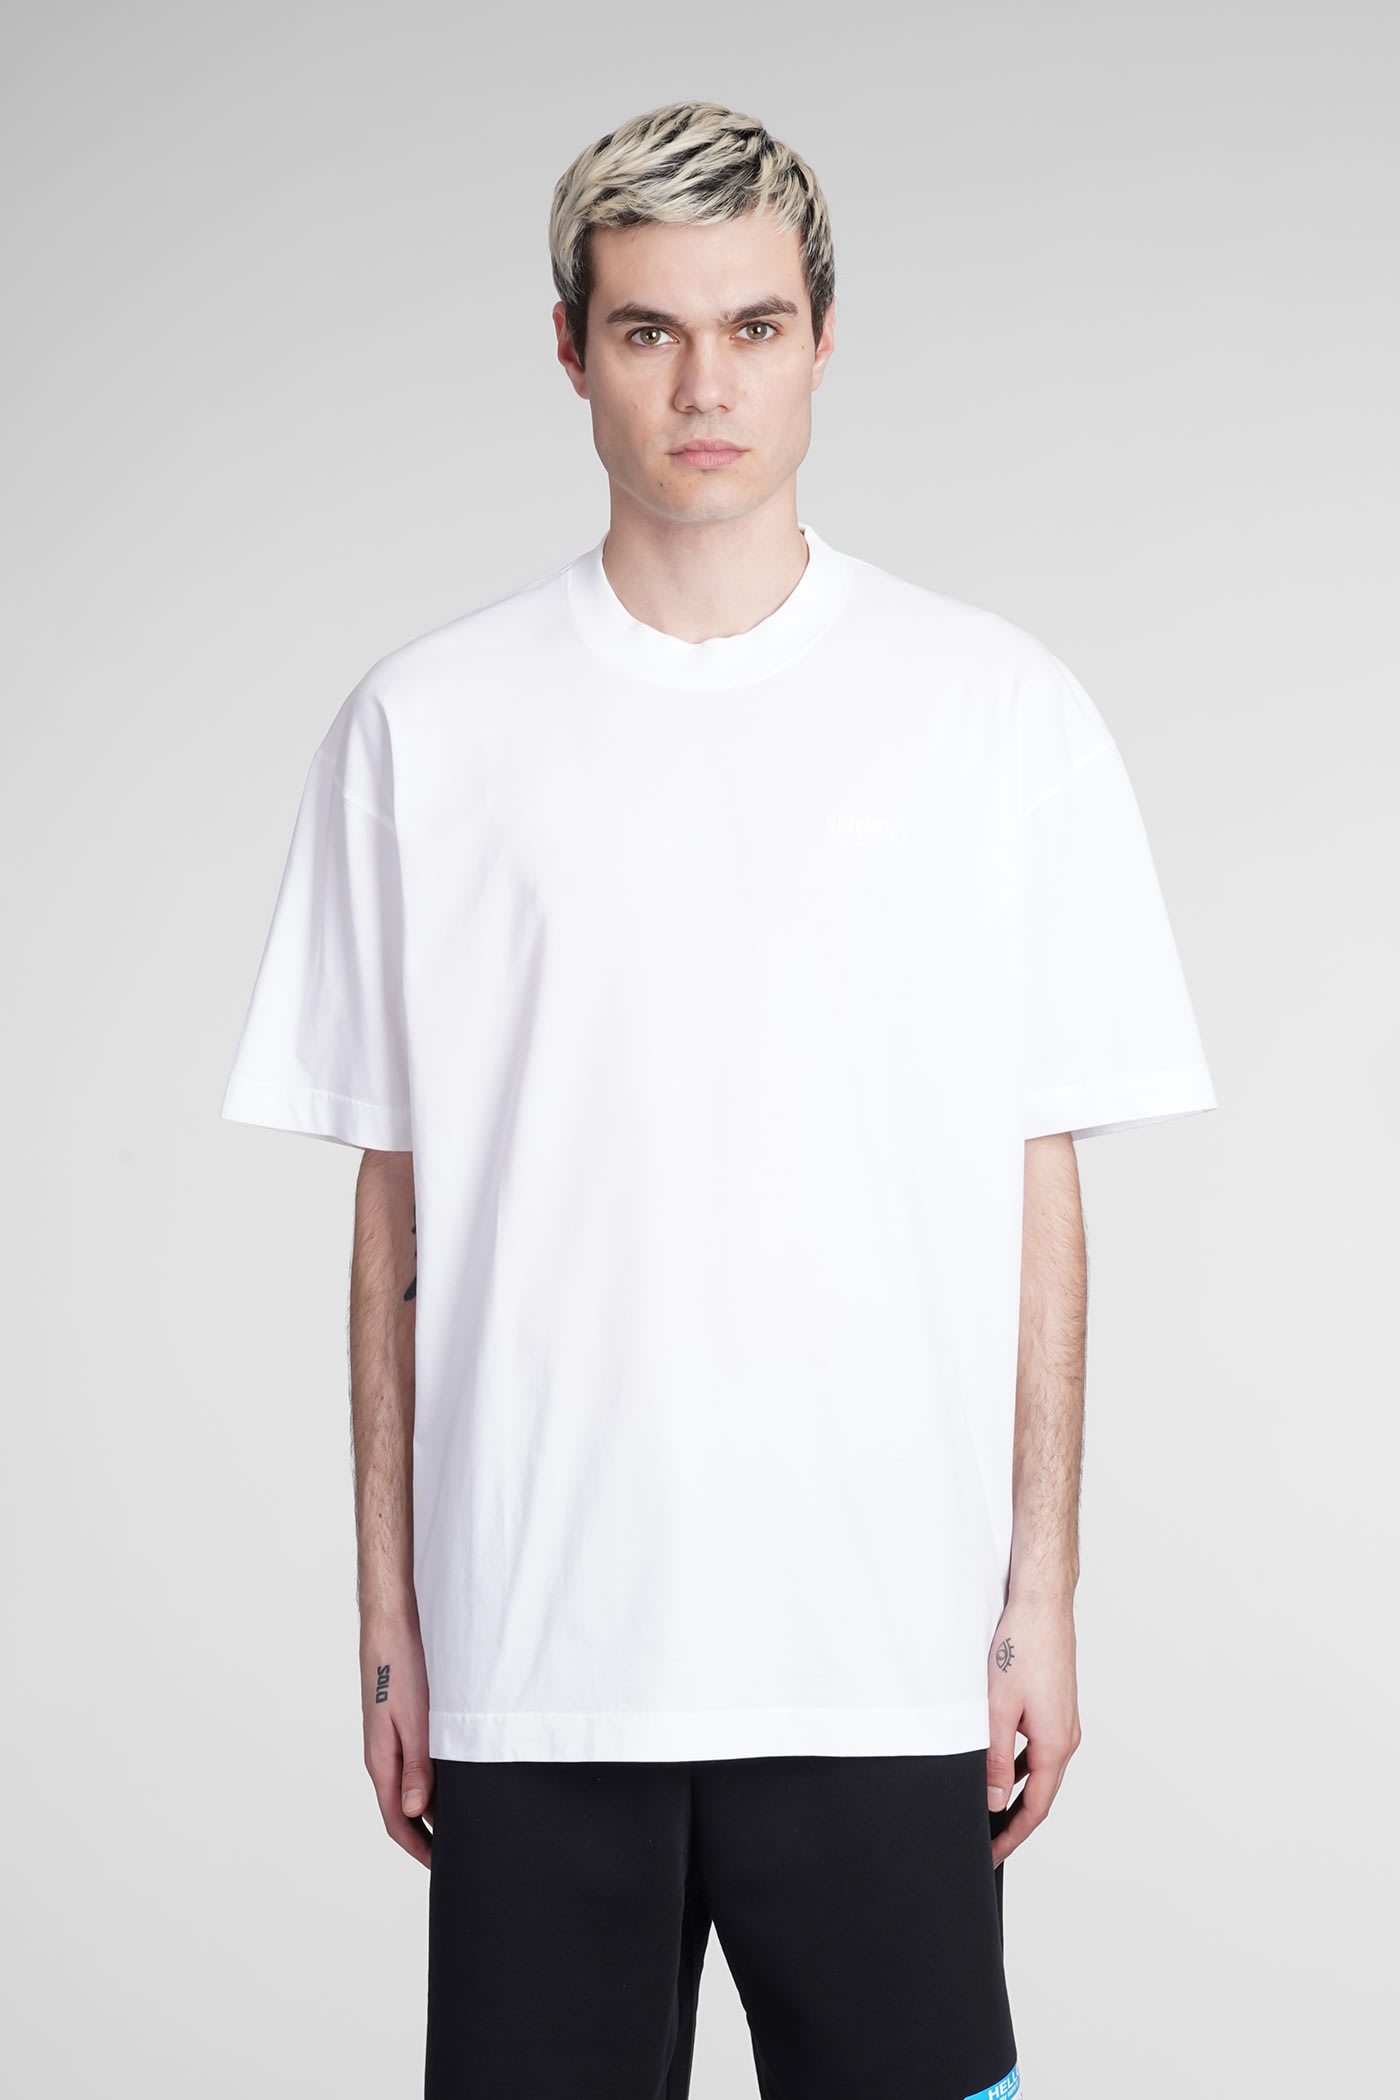 VETEMENTS T-SHIRT IN WHITE COTTON